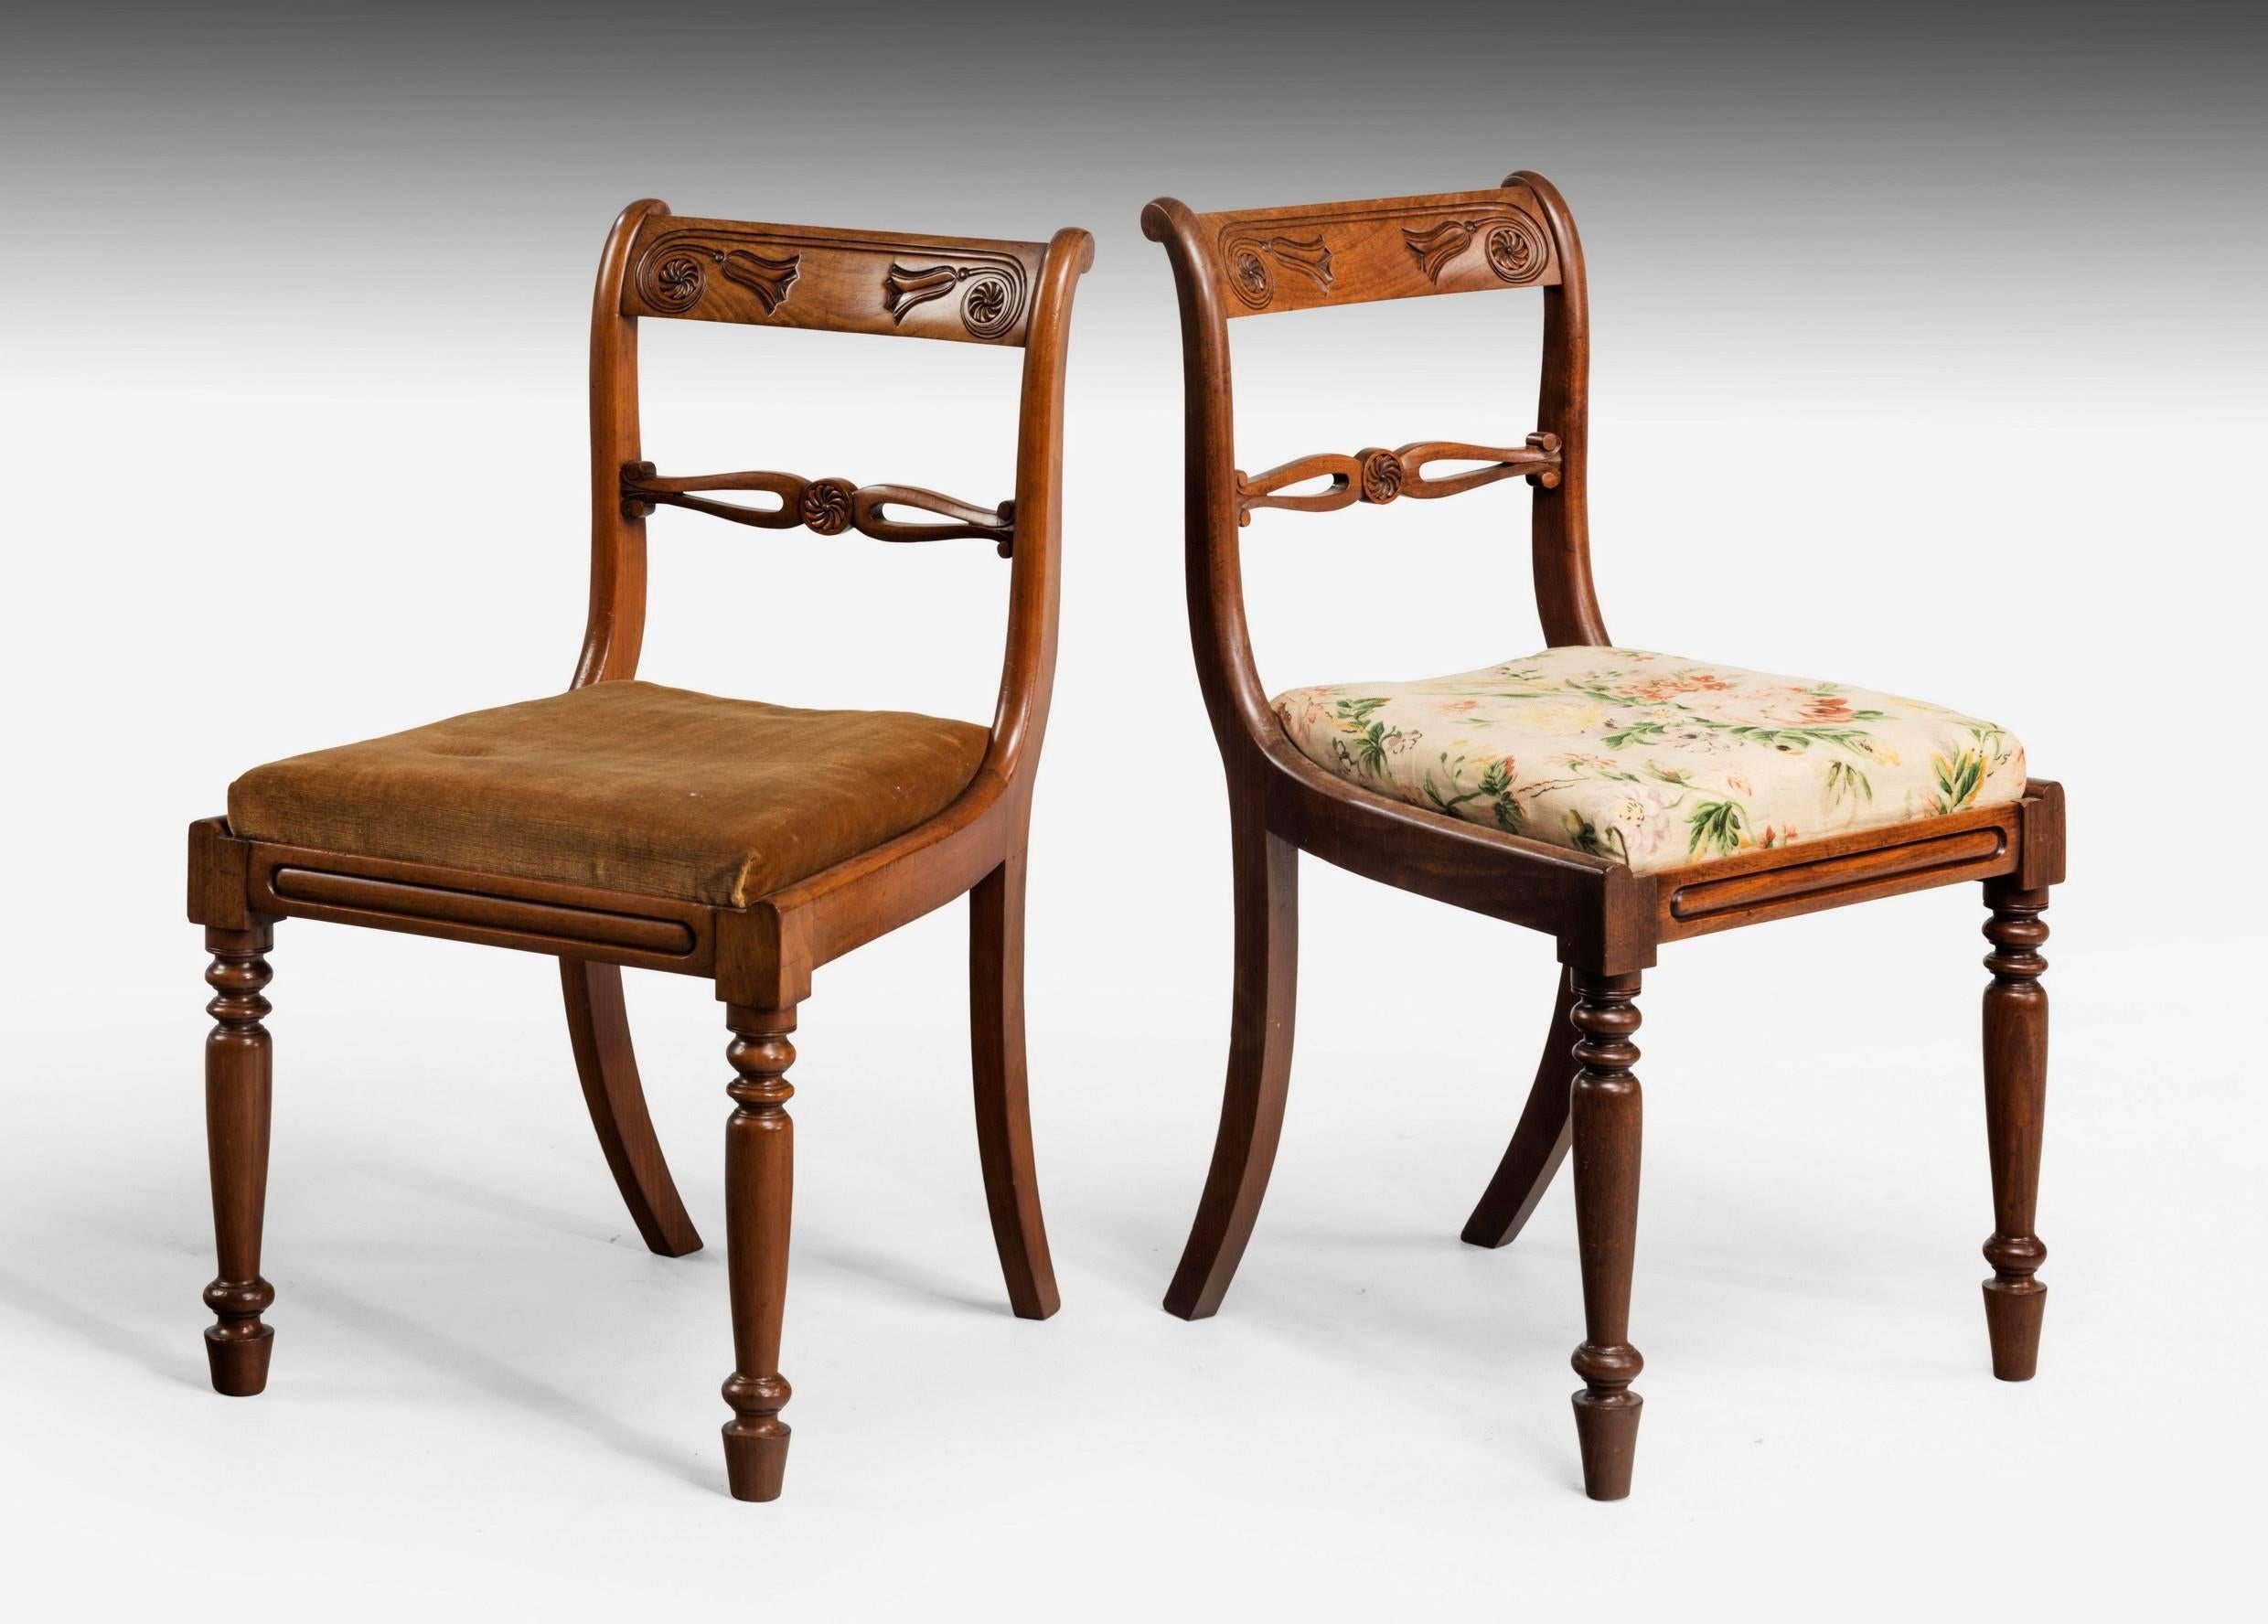 An attractive set of four late Regency period mahogany framed chairs. The back splats with whorls and hare bells. Turned tapering supports.

Measures: The smaller chairs:

Height 32.25 inches,
width 18 inches,
depth 16.50 inches.